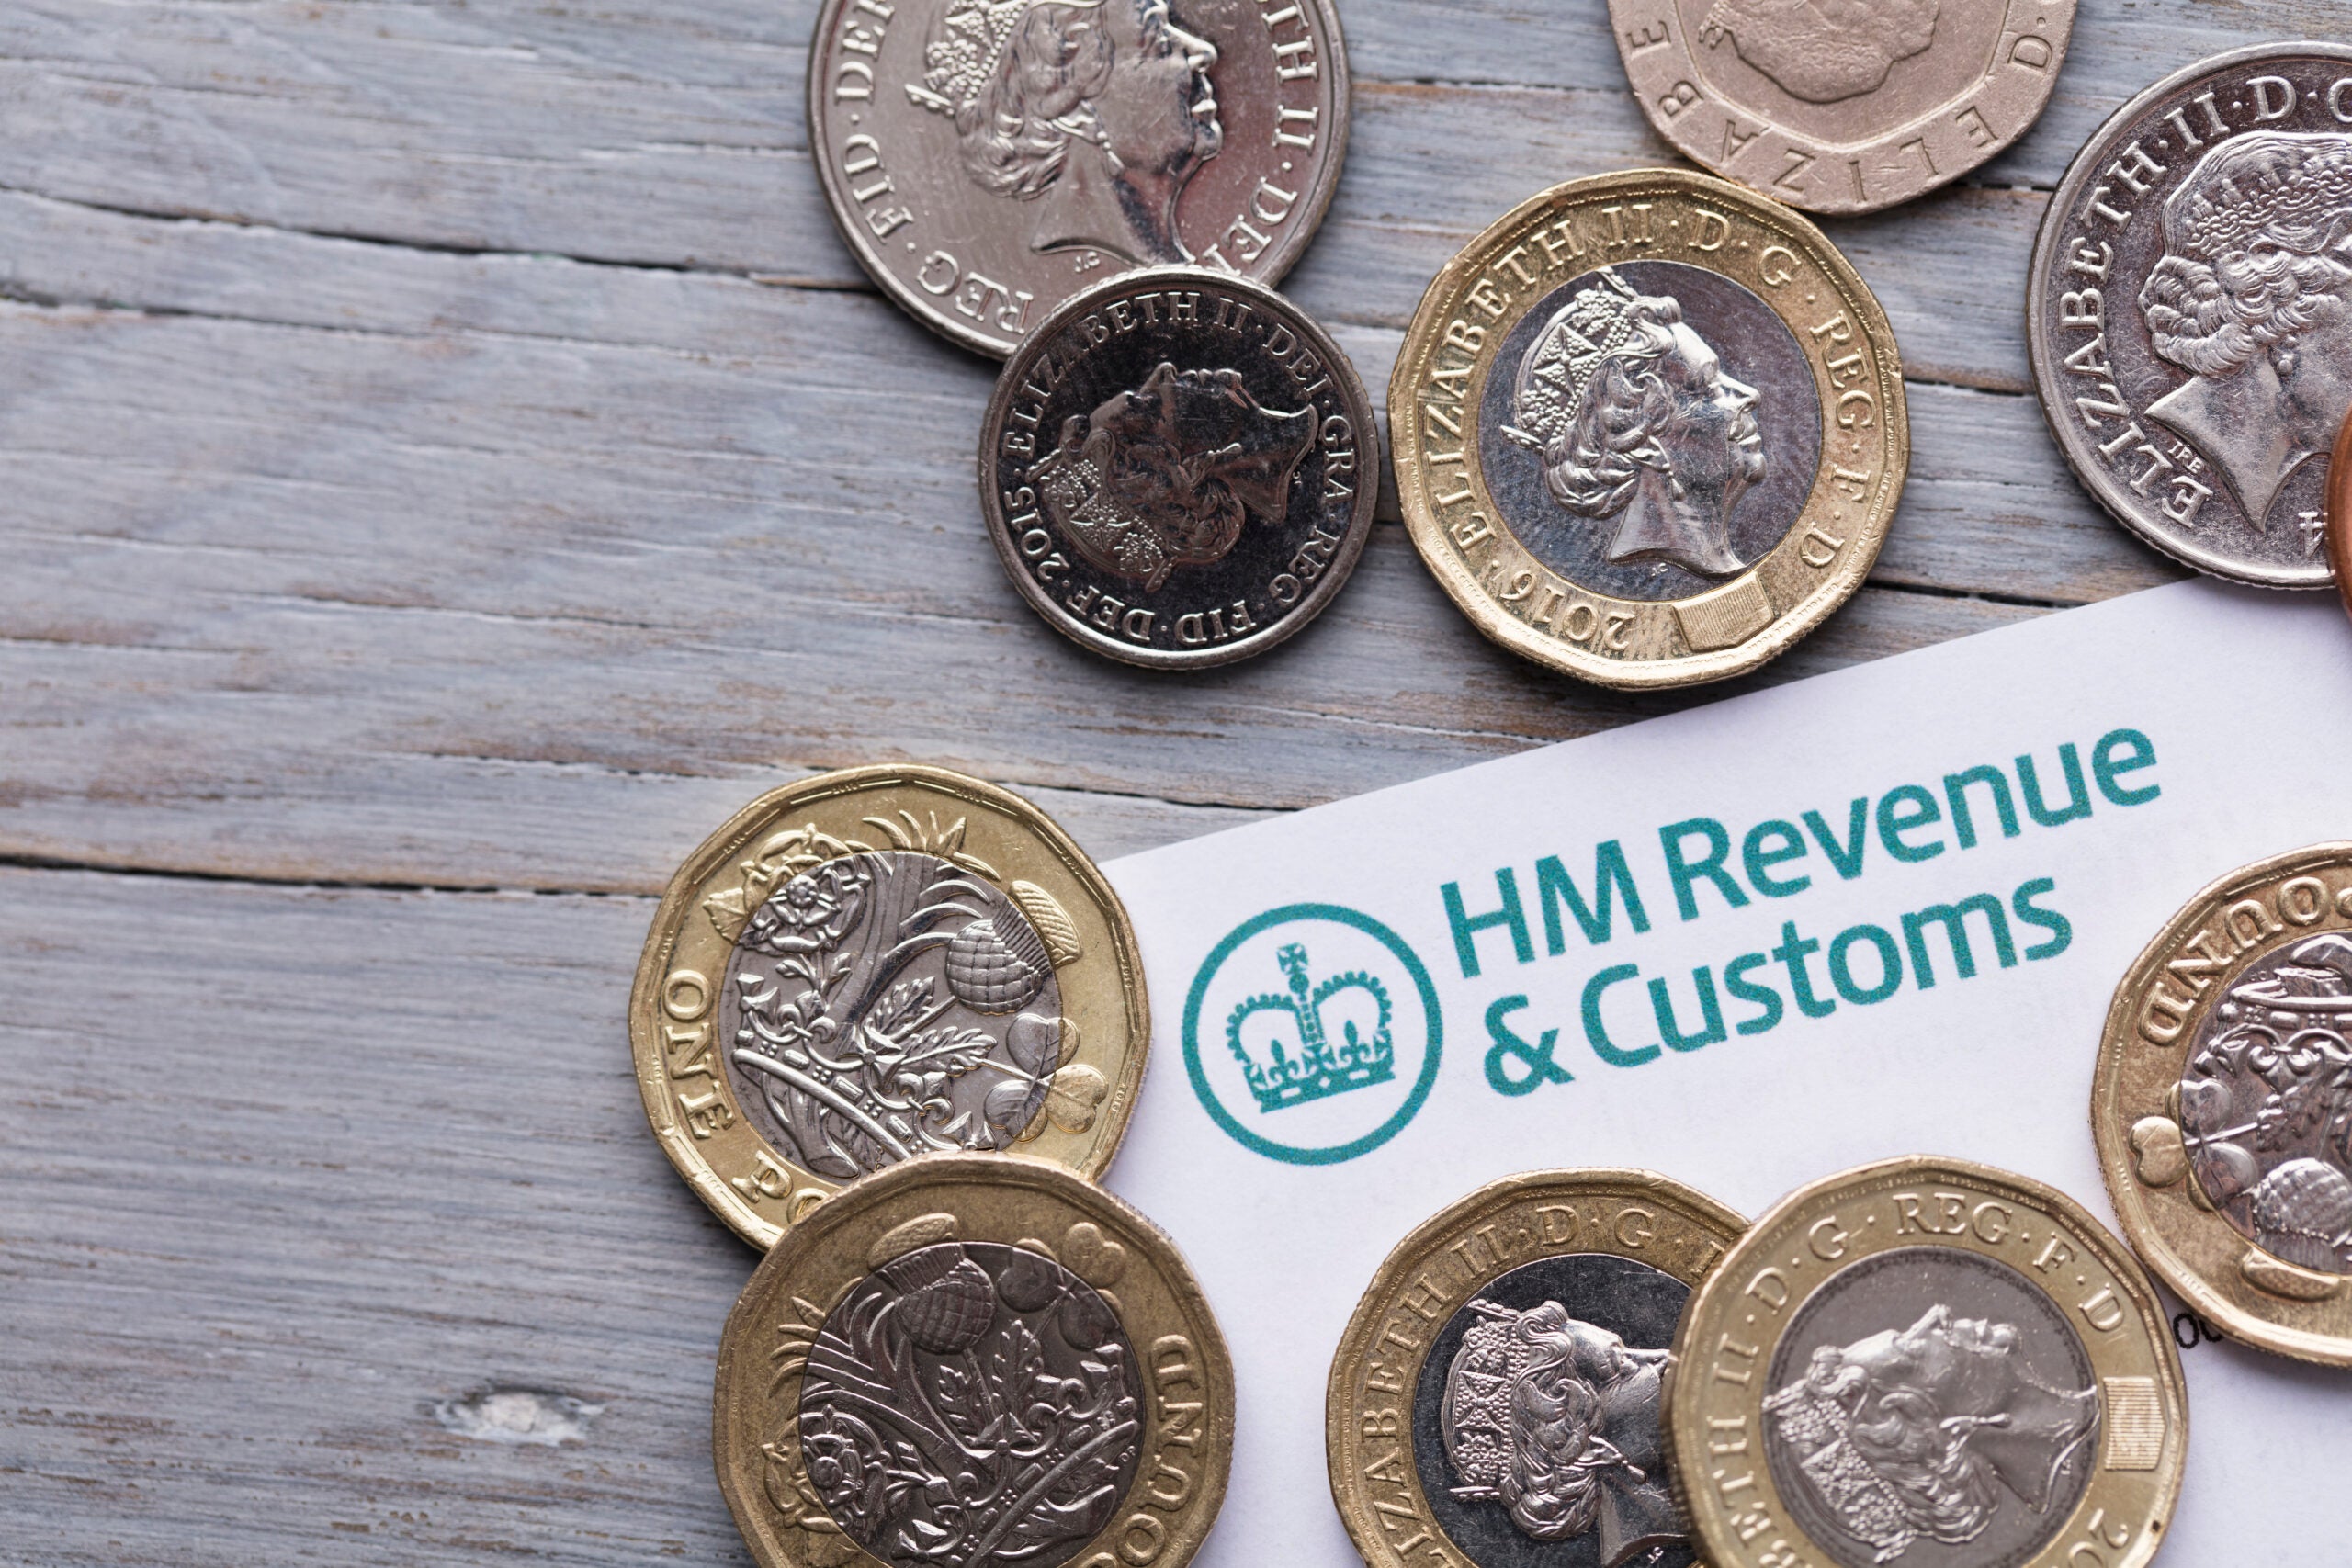 Production orders and HMRC’s criminal investigation information powers